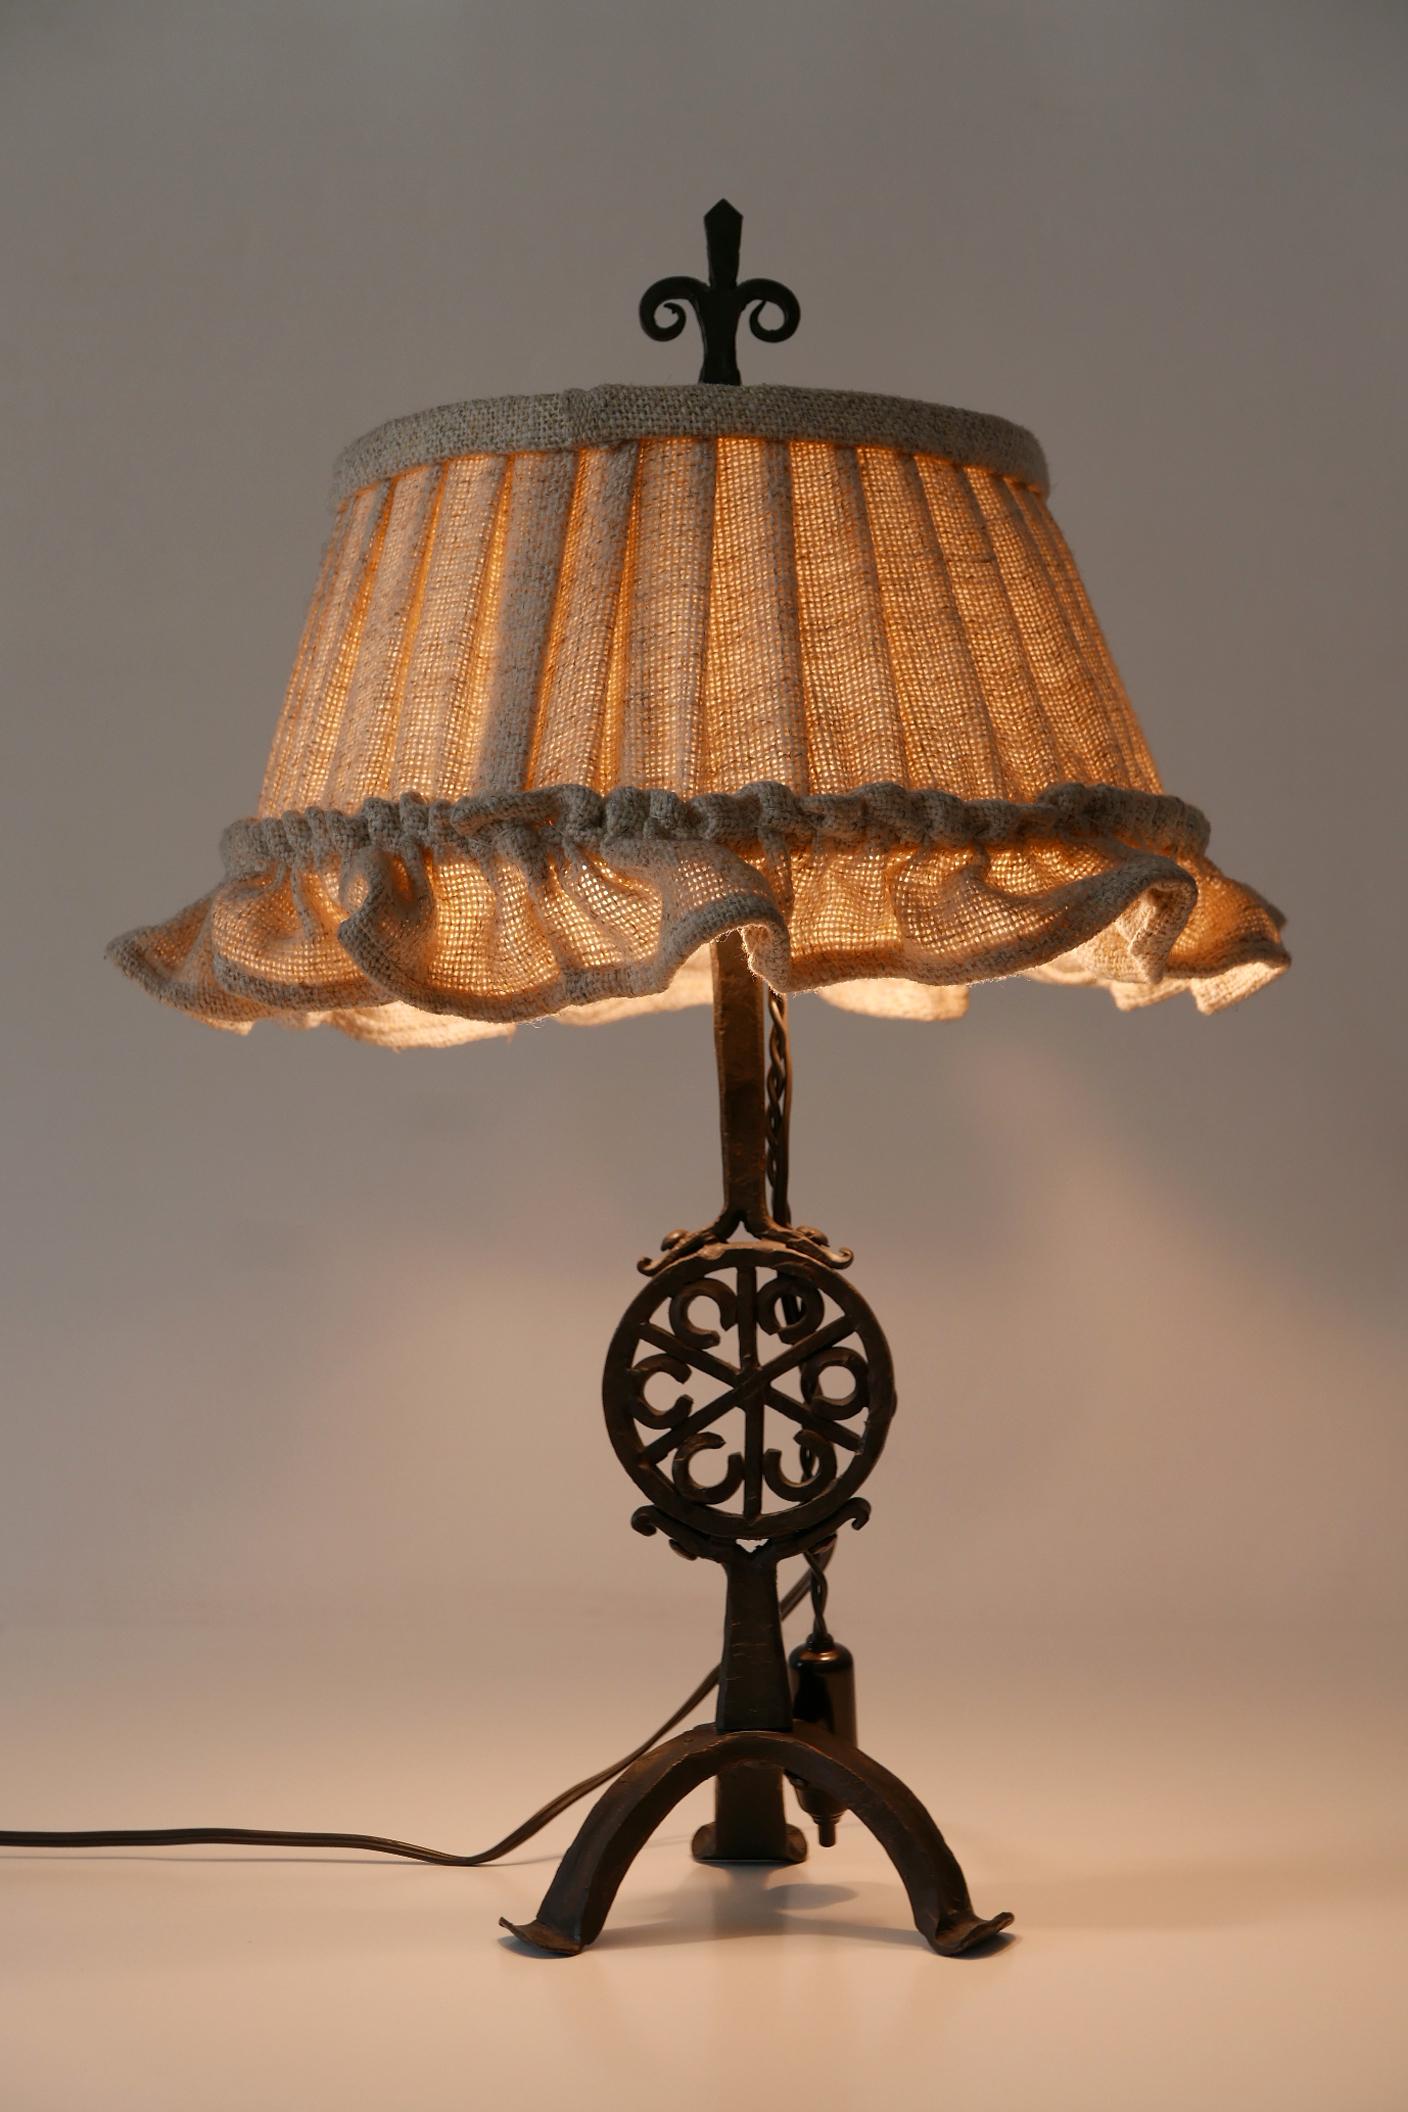 Elegant Mid-Century Modern night table lamp. Manufactured in Germany, 1960s.

Executed in wrought iron and jute, the night table lamp comes with 2 x E27 / E26 Edison screw fit bulb holders, is wired, in working condition and runs both on 110 / 230